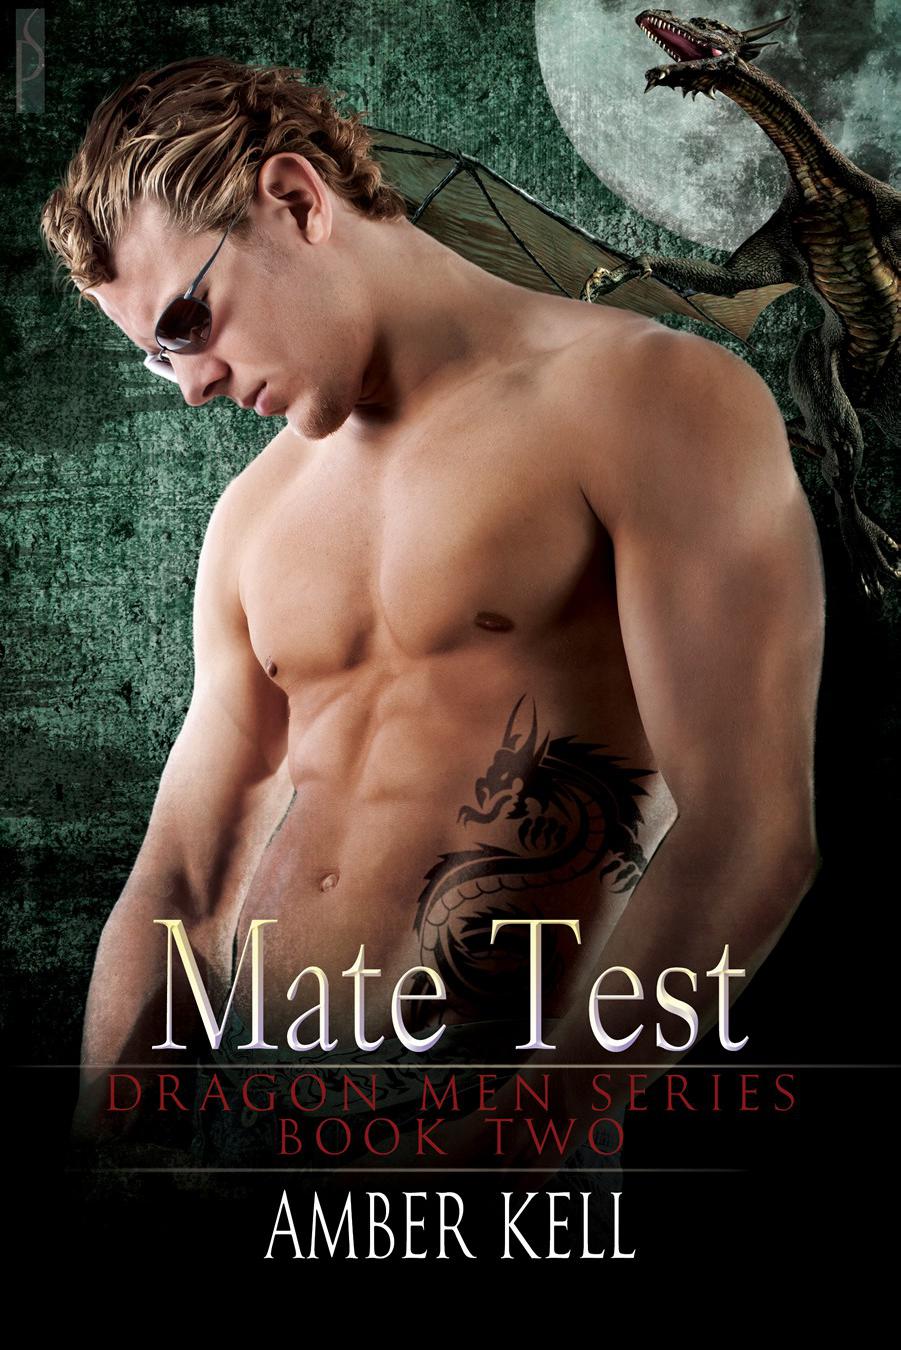 Mate Test by Amber Kell